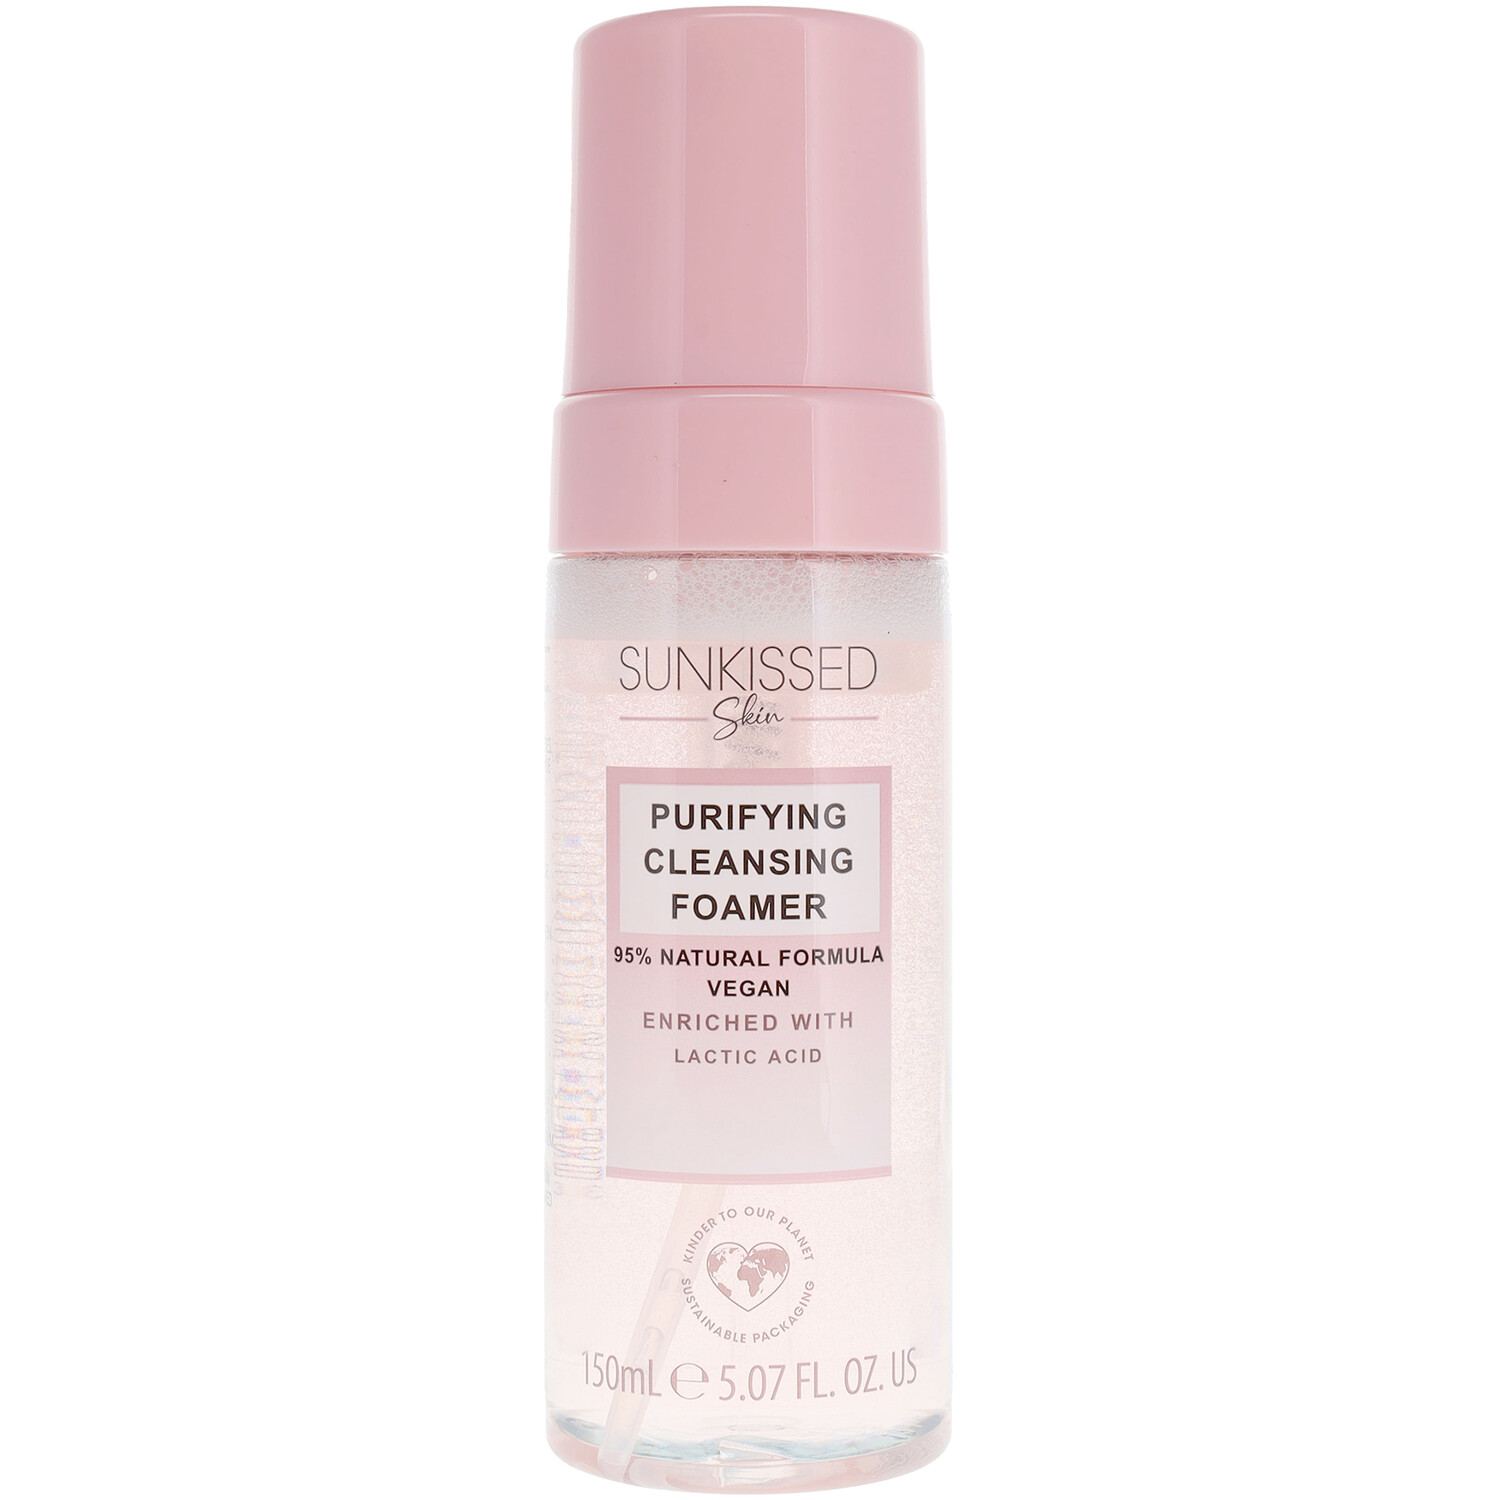 Sunkissed Purifying Cleansing Foamer - Pink Image